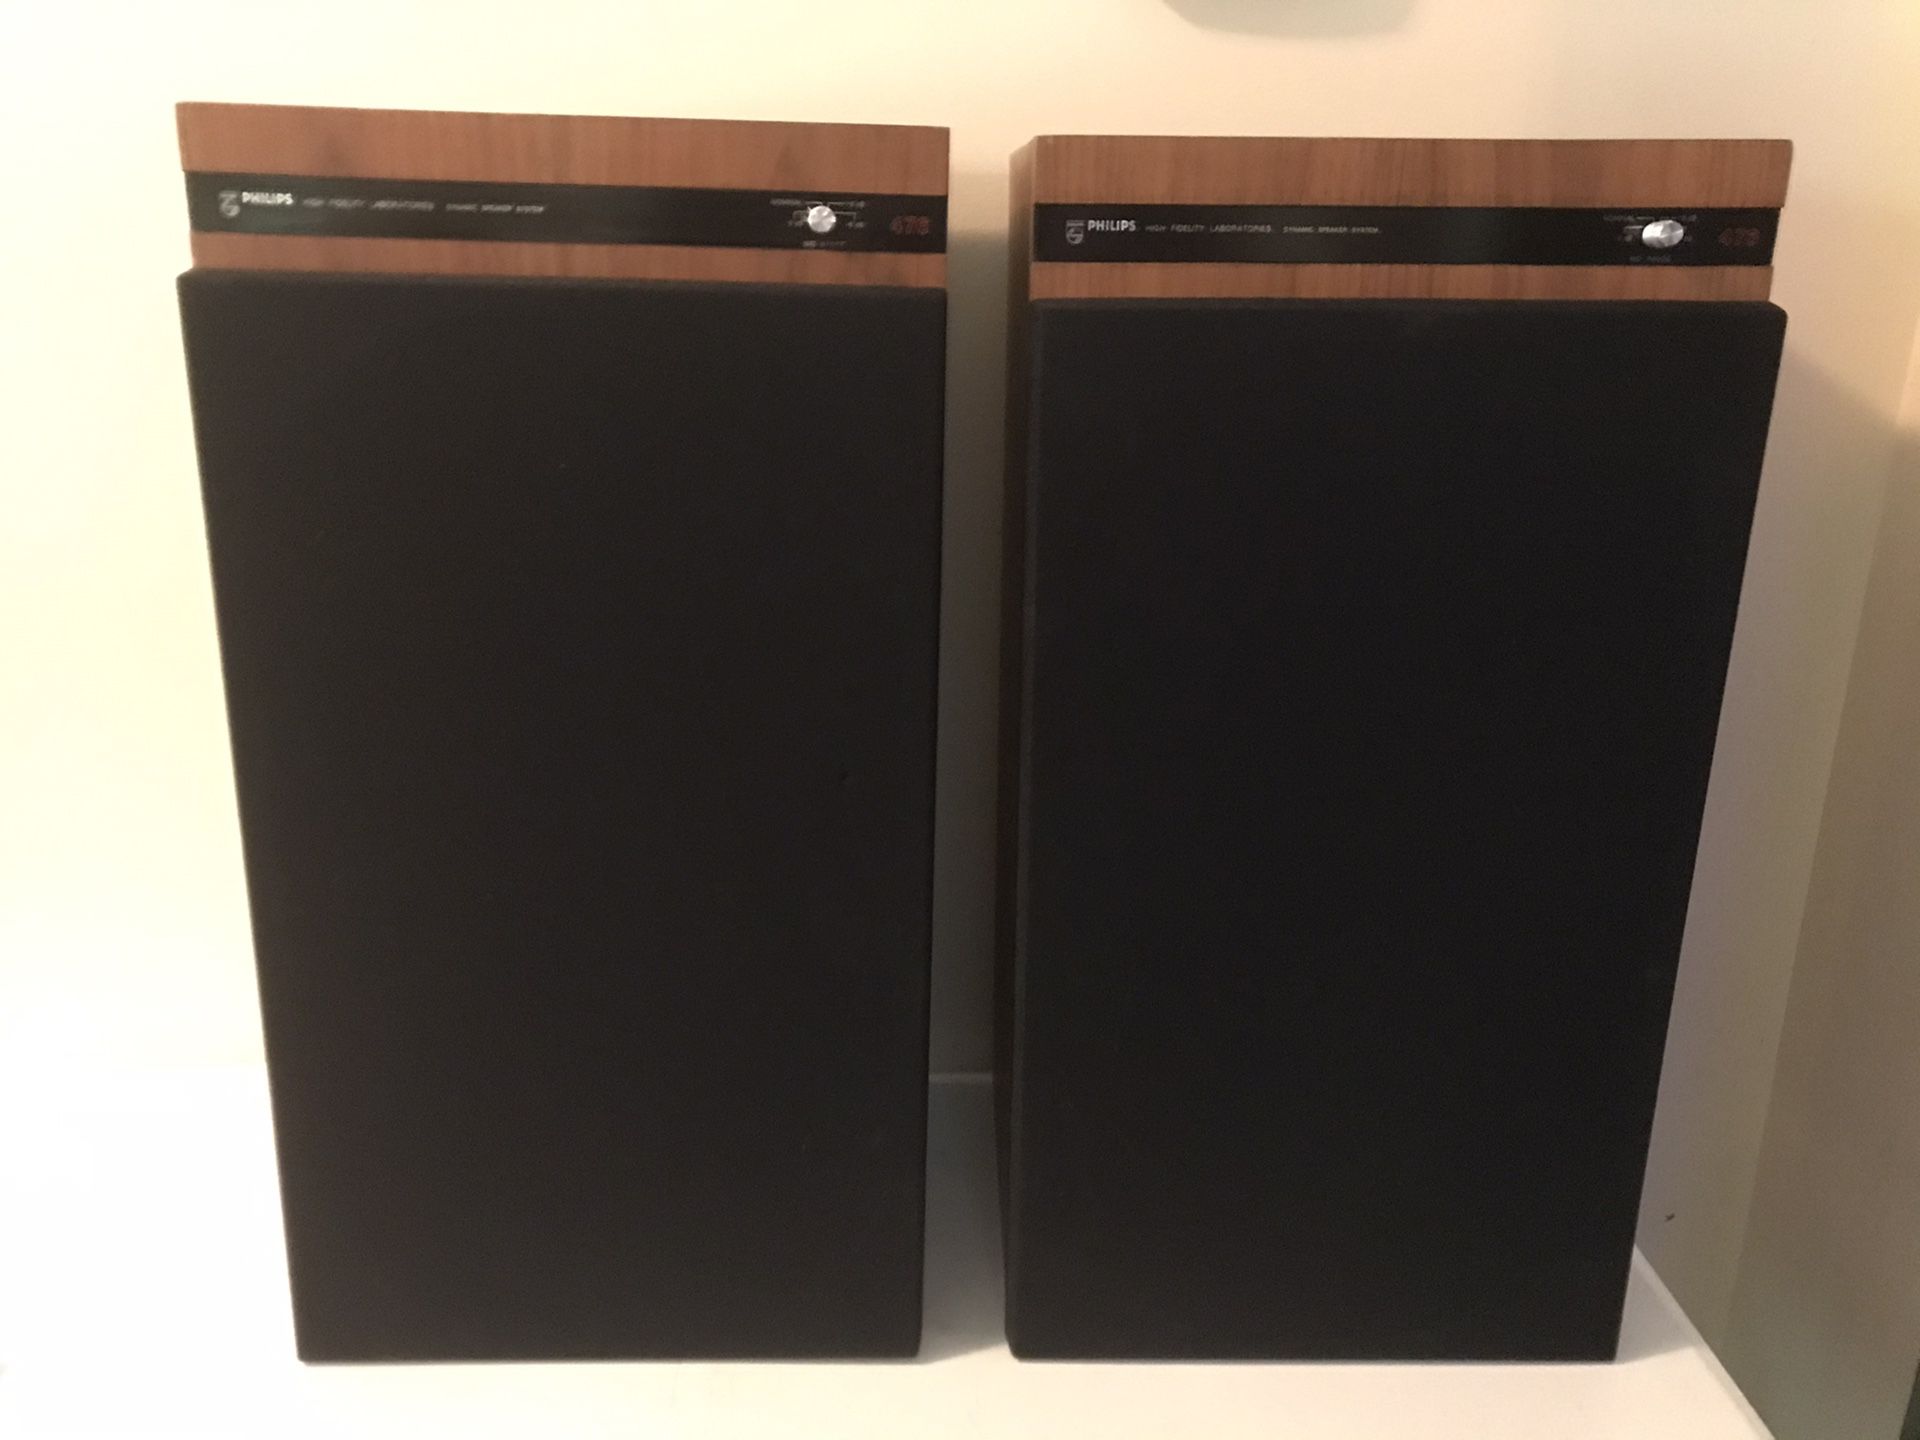 Philips 3 Way Speakers System Model 476 10" Woofers 75 Watts High Fidelity